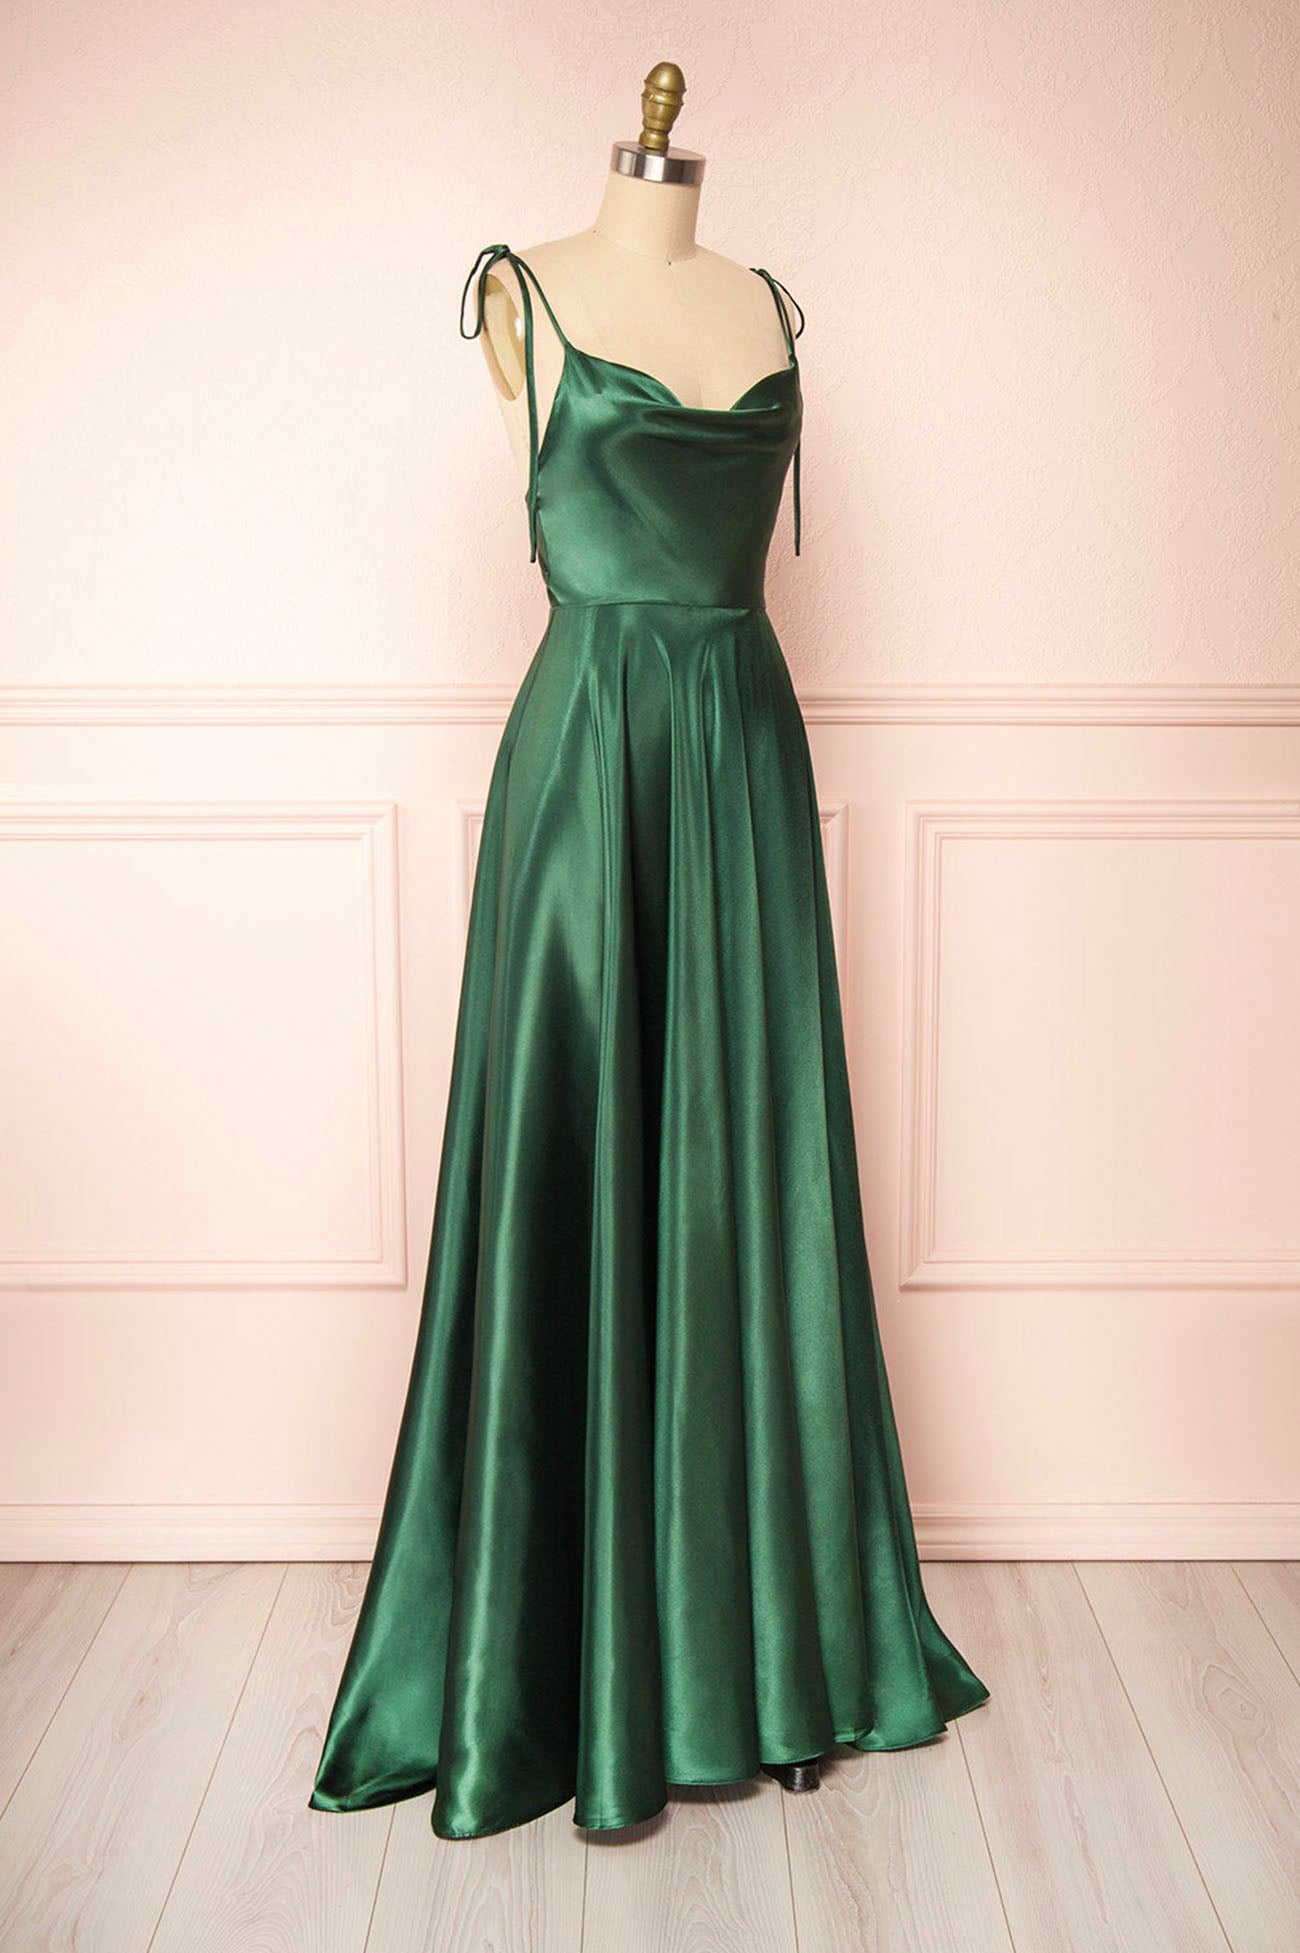 Simple Satin Long Prom Dress, A-Line Spaghetti Strap Evening Party Dress